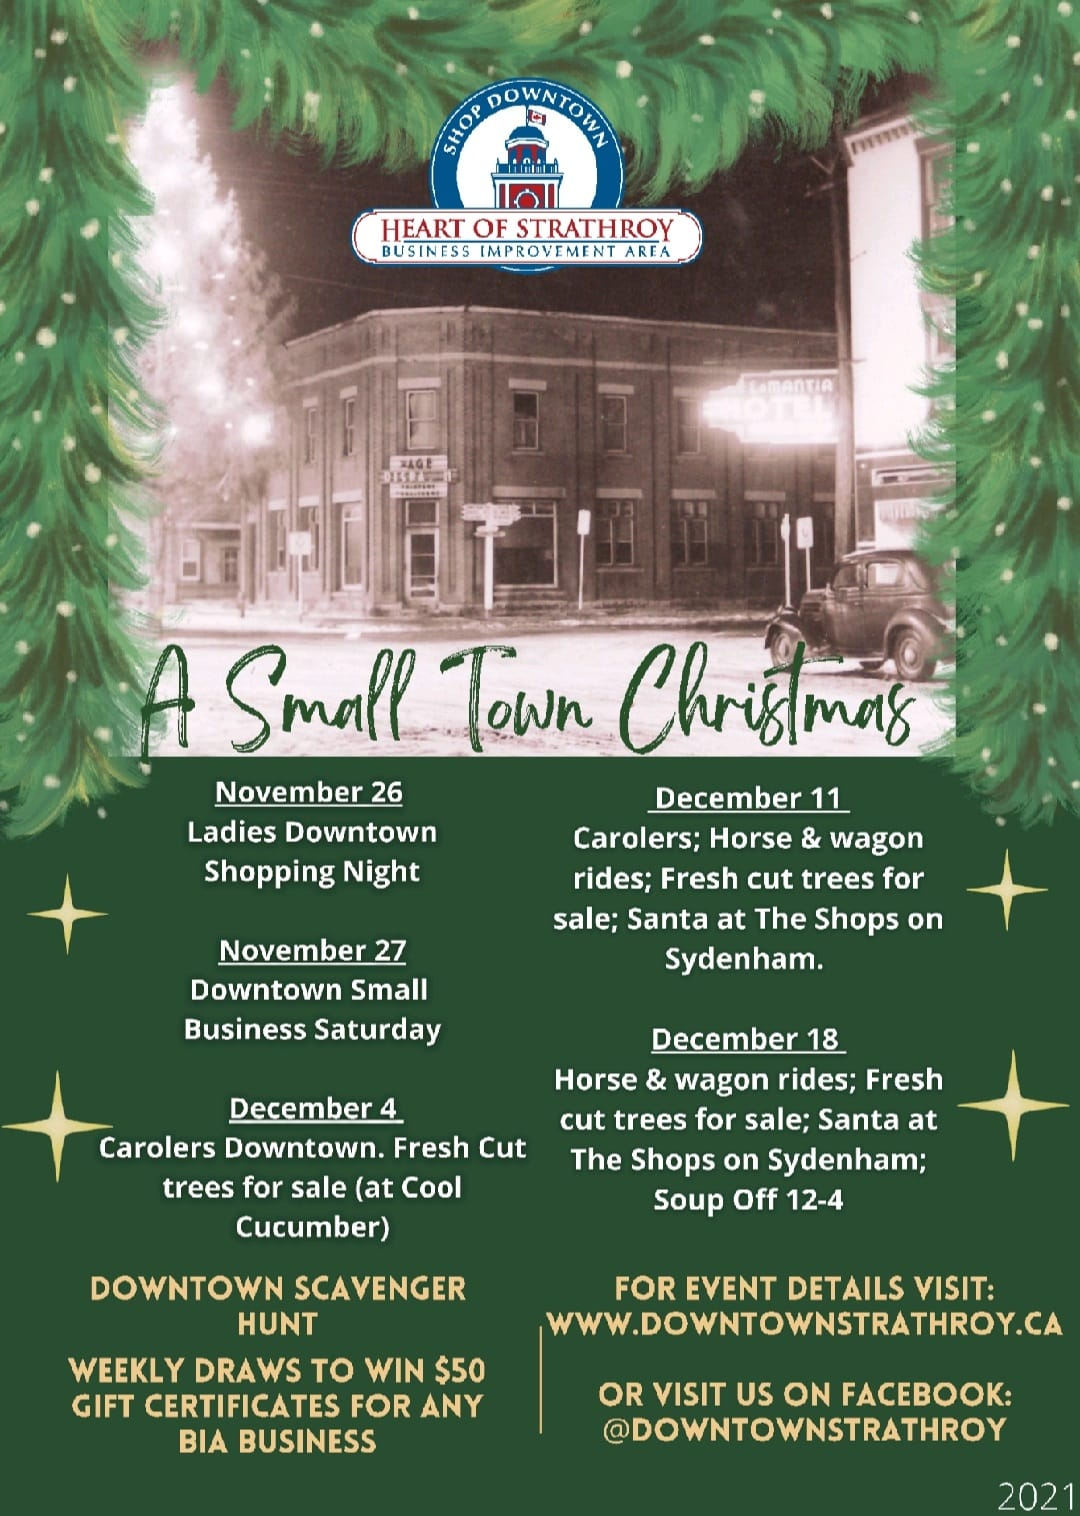 small town Christmas info poster 